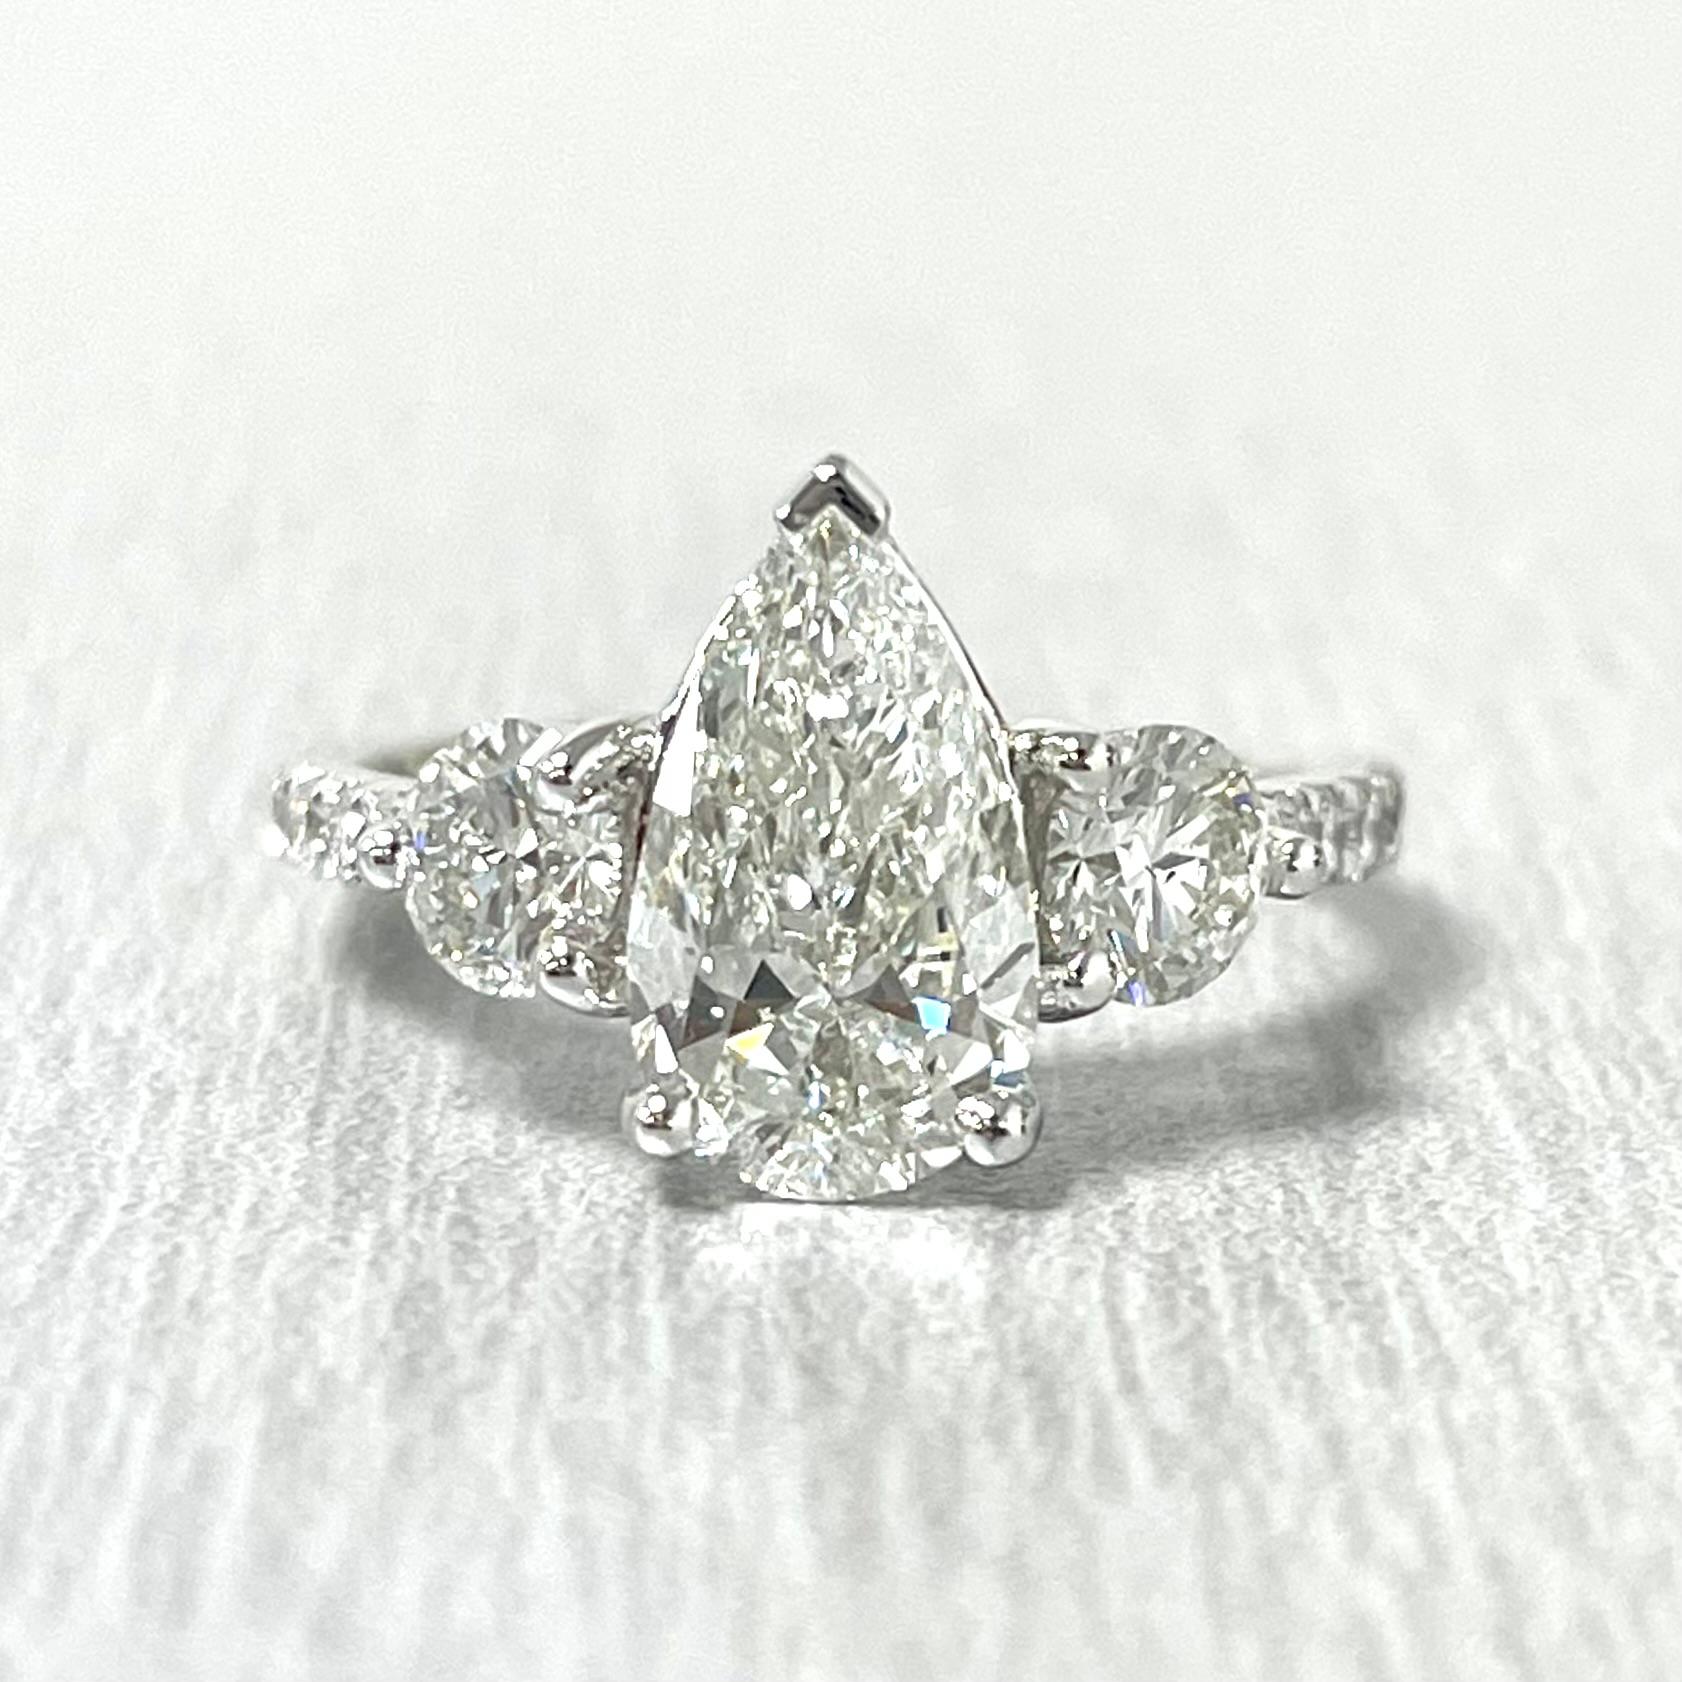 Featuring a 1.50 ct ISI1 GIA Pear Shape that measures like a 1.75 ct gorgeously flanked by matching 0.30 ct GIA ISI1 certified rounds, the Reina Engagement Ring is a fire cracker.

Center Diamond Shape: Pear Shape
Center Diamond Weight: 1.50 ct